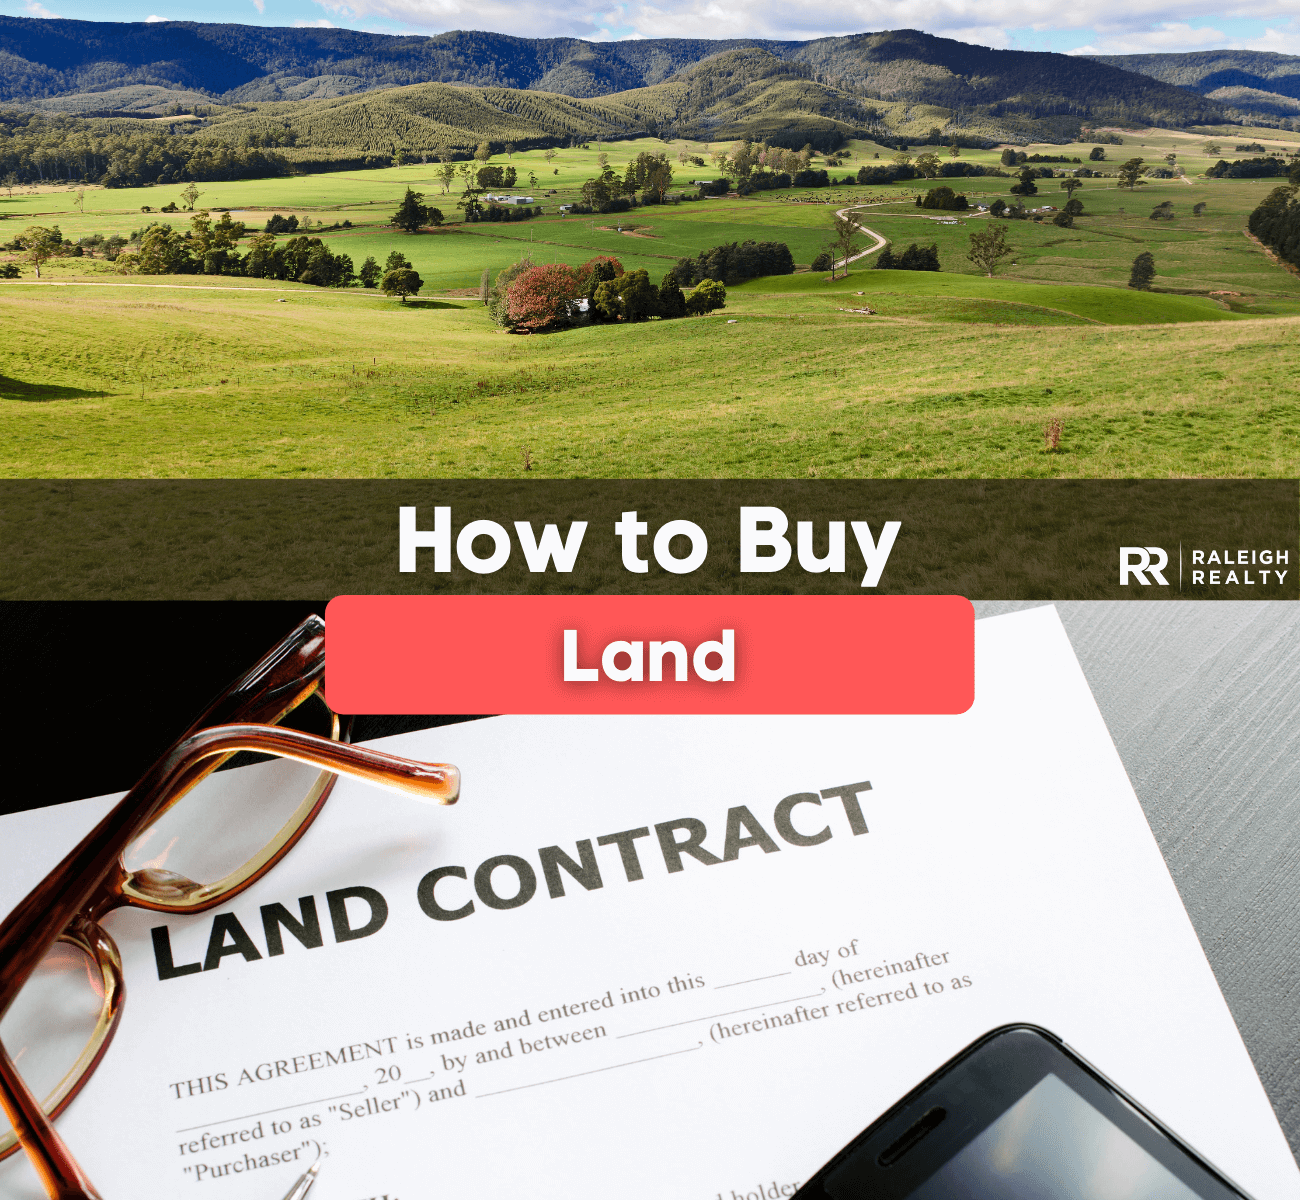 How to buy land covering everything from the purchase of land to the land contract agreement